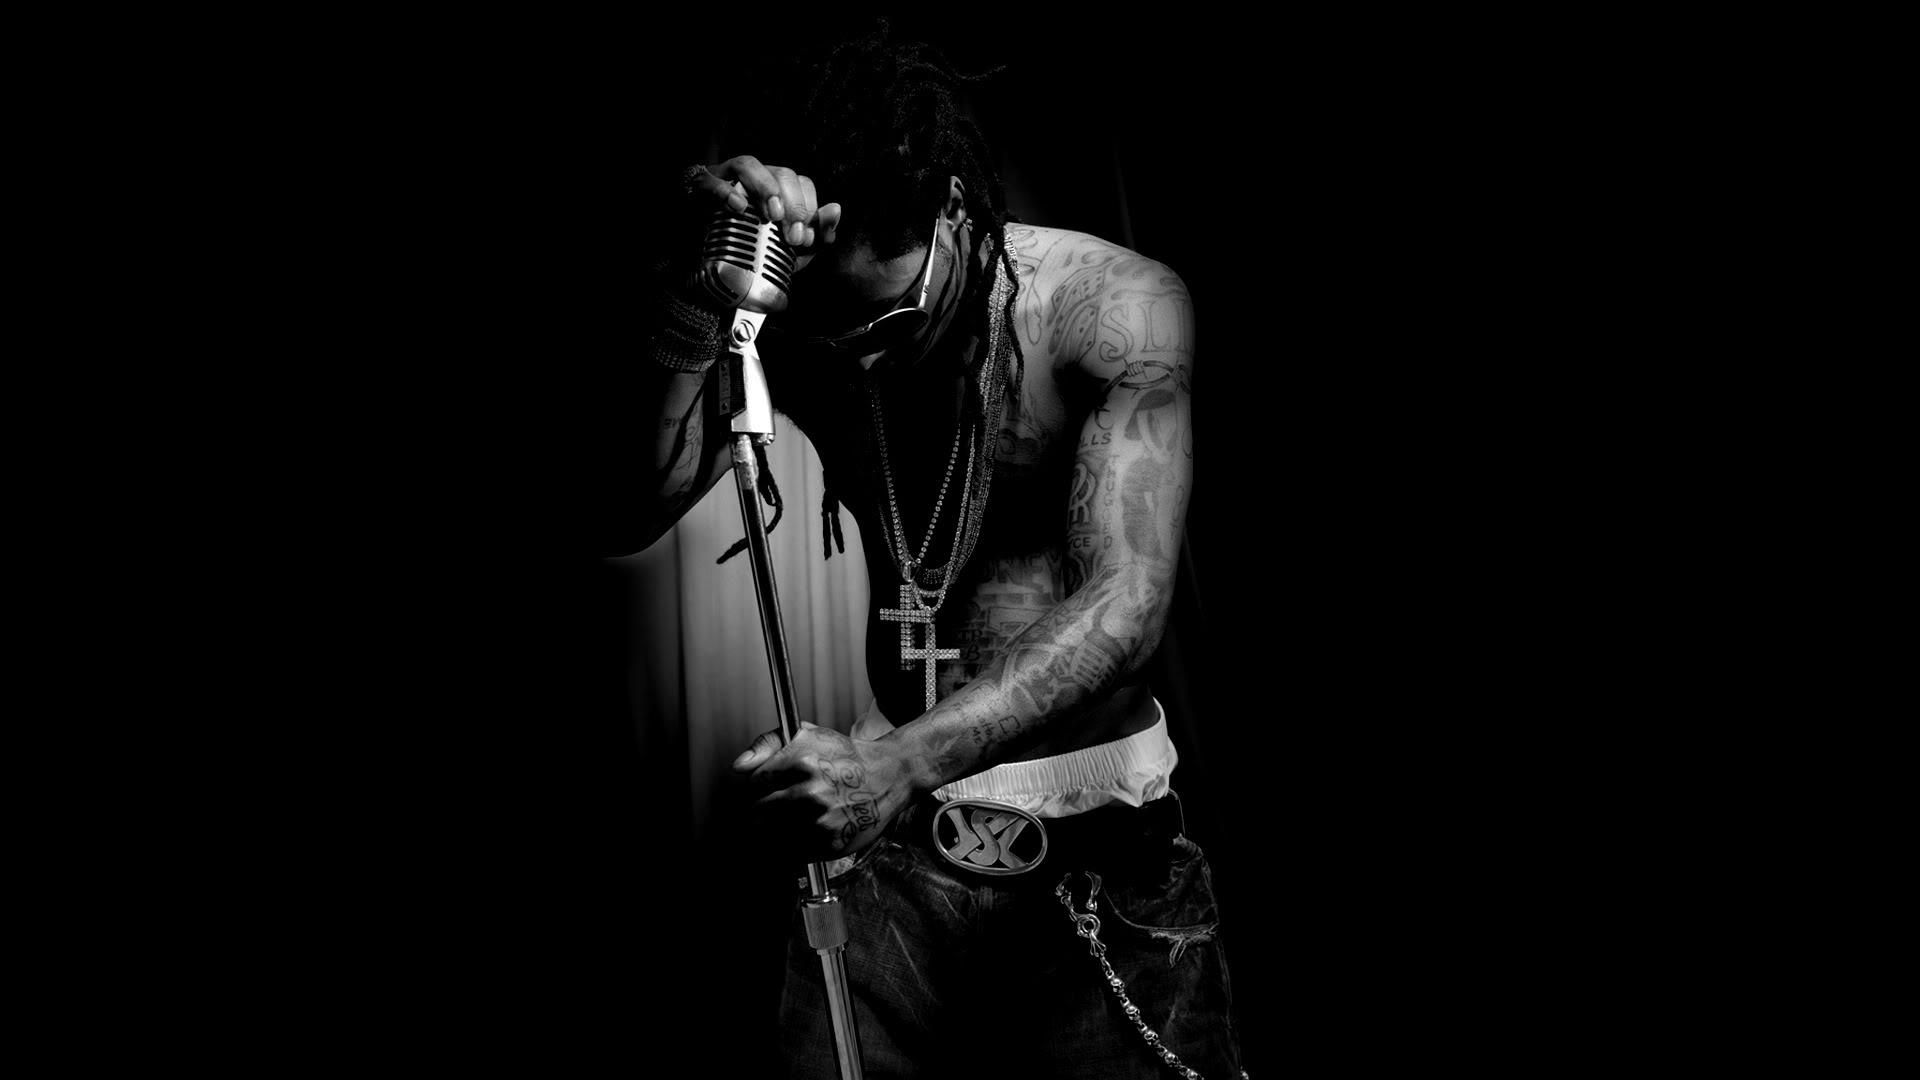 1451665 Lil Wayne Wallpaper Hd Free Wallpapers Backgrounds Images ...